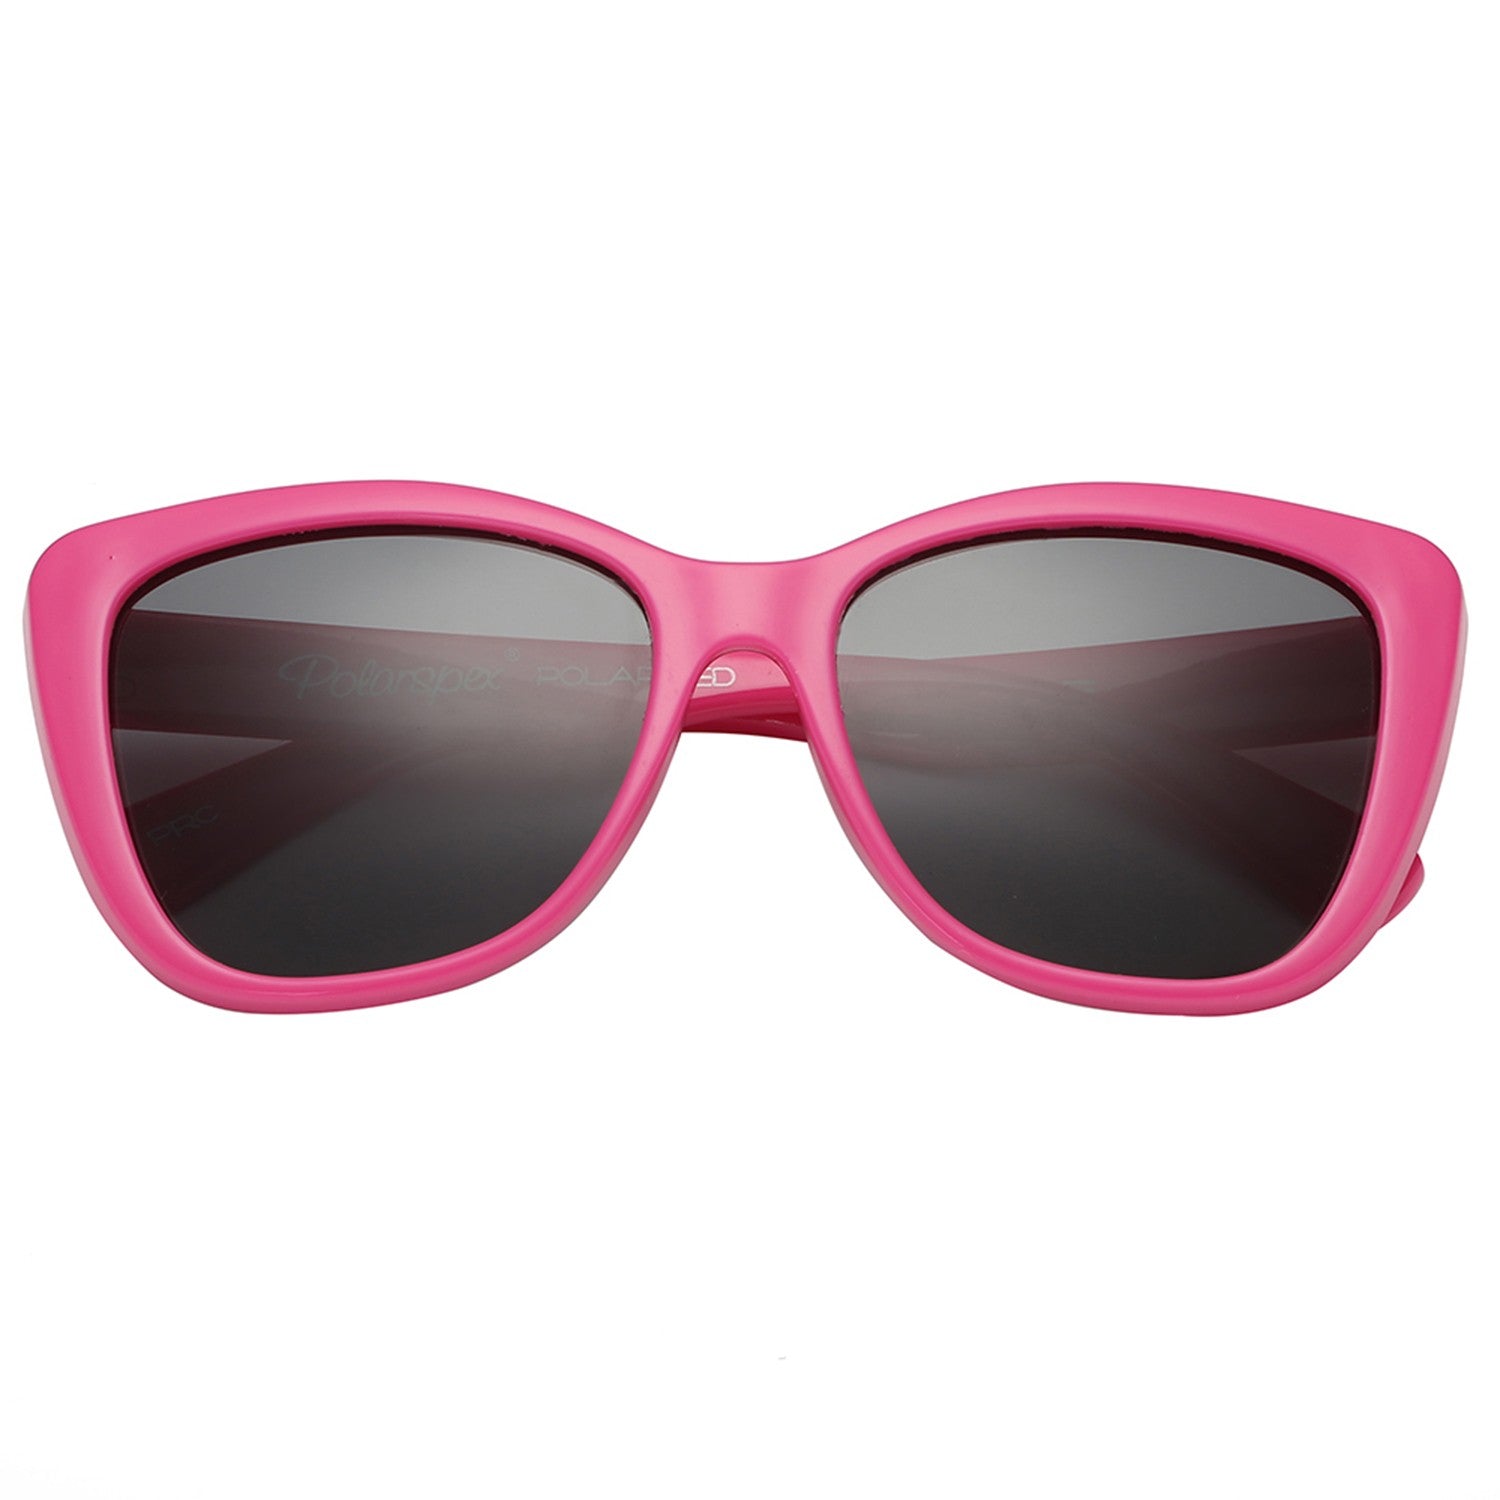 Polarspex Polarized Elastic Cateyes Style (BPA Free) Kids Sunglasses with Princess Pink Frames and Polarized Smoke Lenses for Girls (Ages 3 - 10)